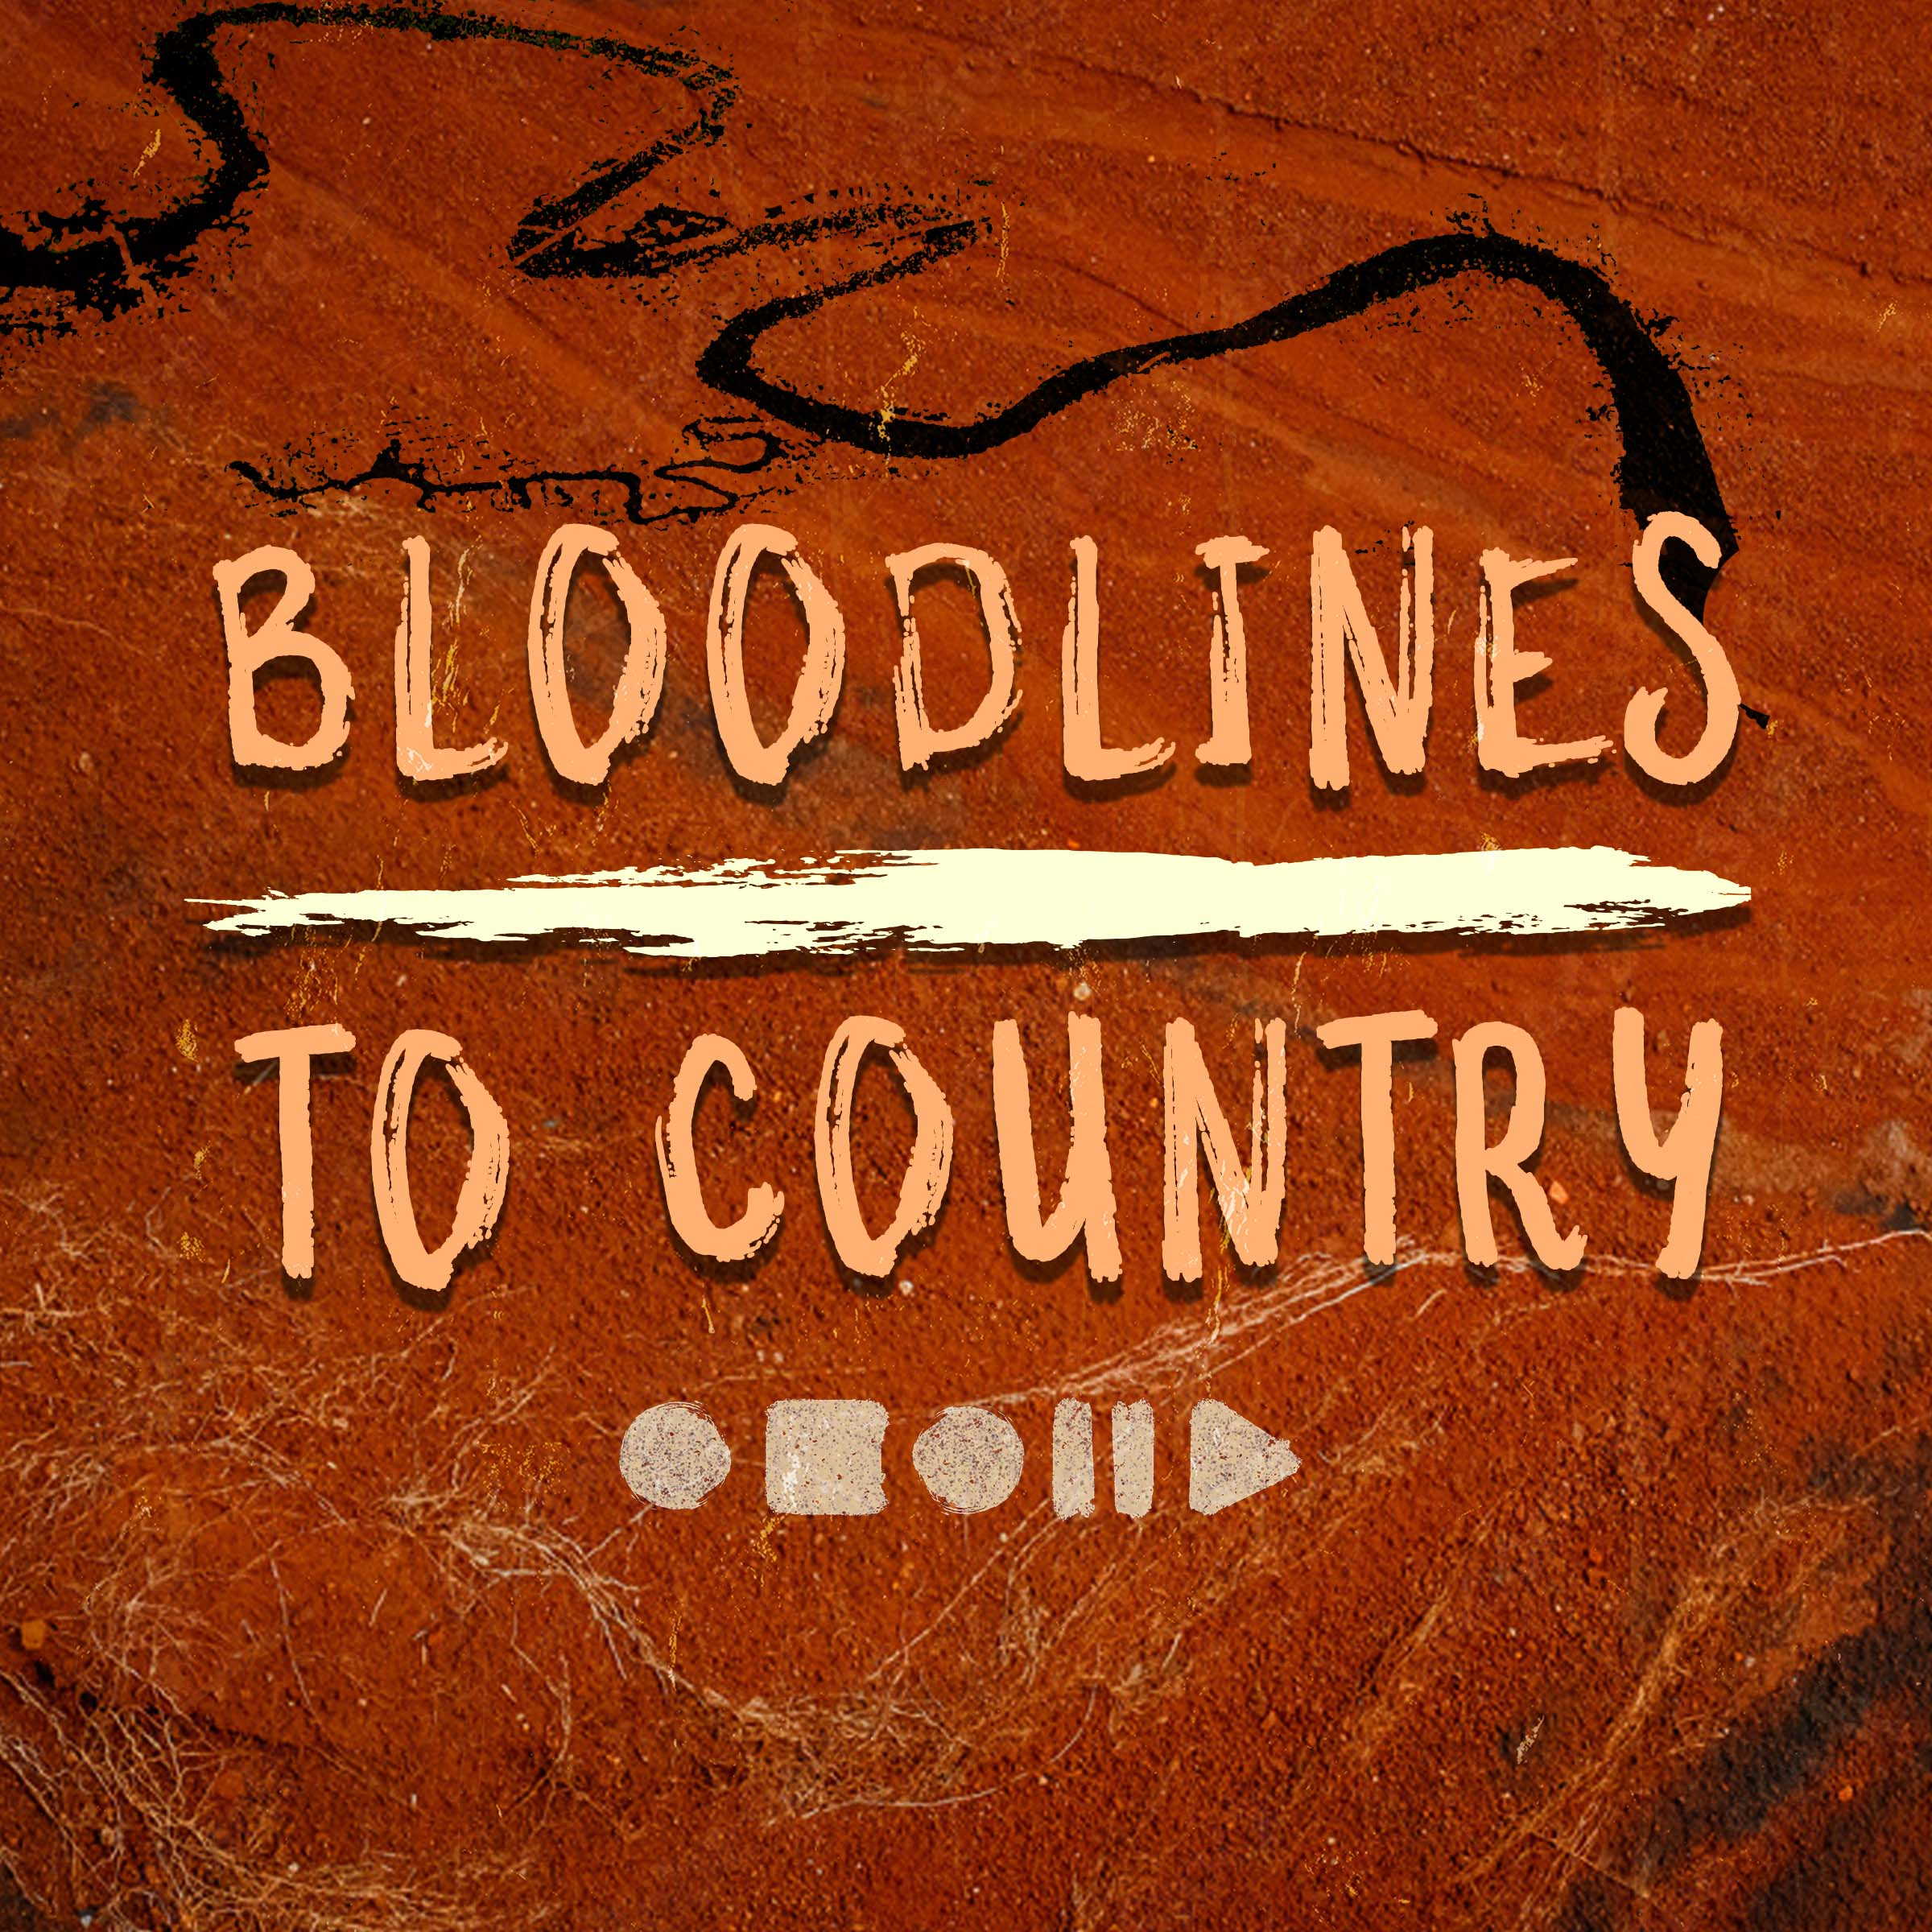 Bloodlines To Country